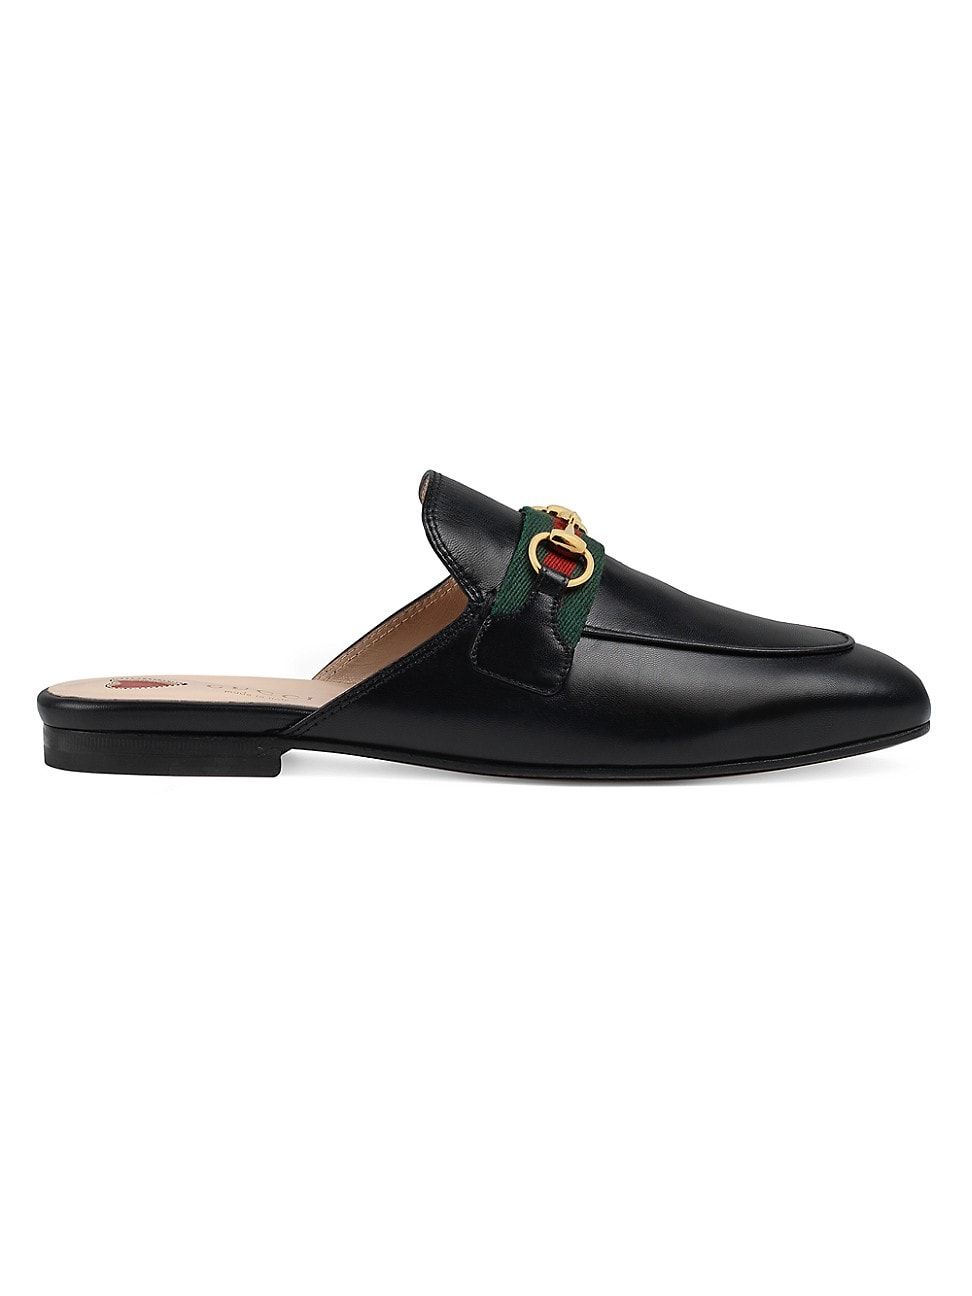 Gucci Princetown Leather Slippers | Saks Fifth Avenue